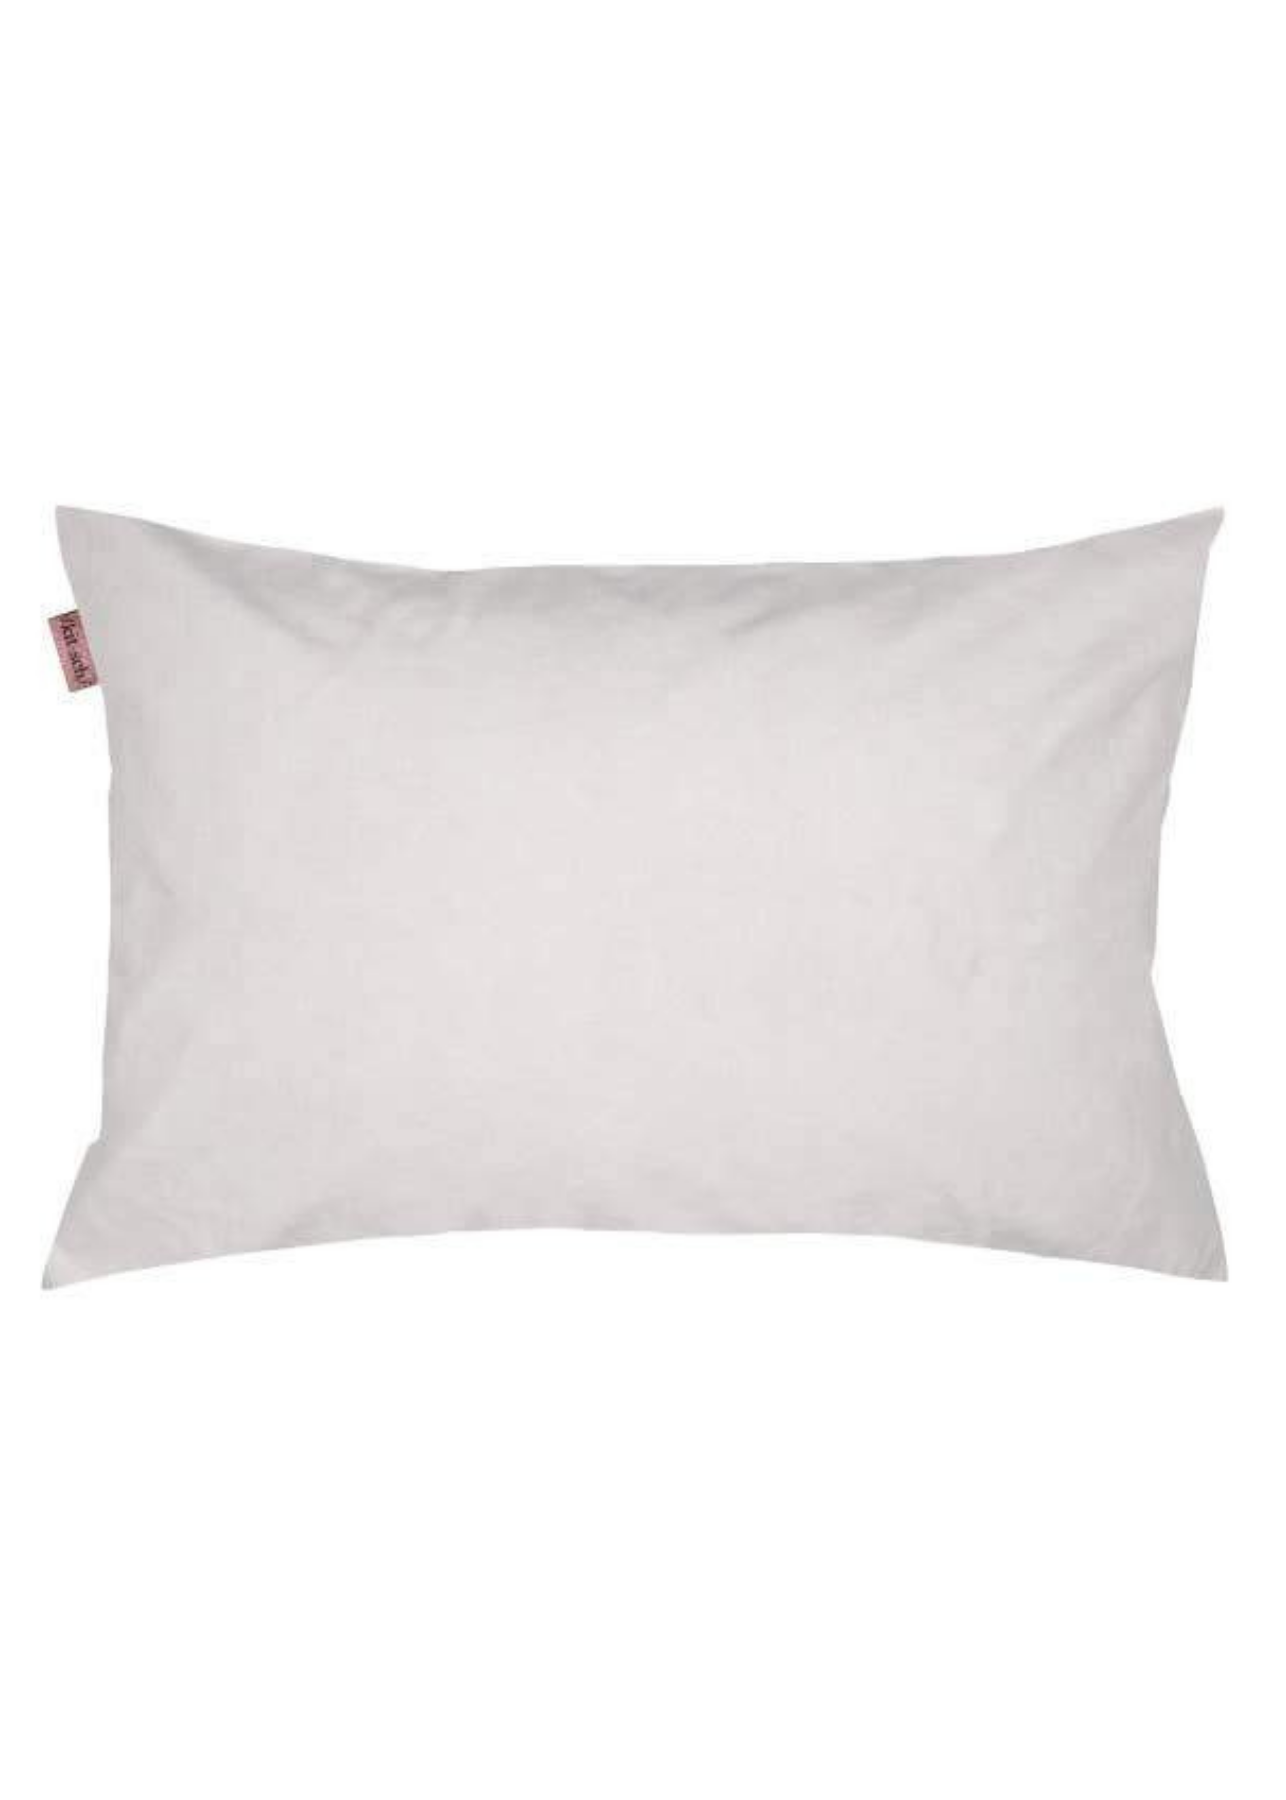 Ivory Towel Pillow Cover